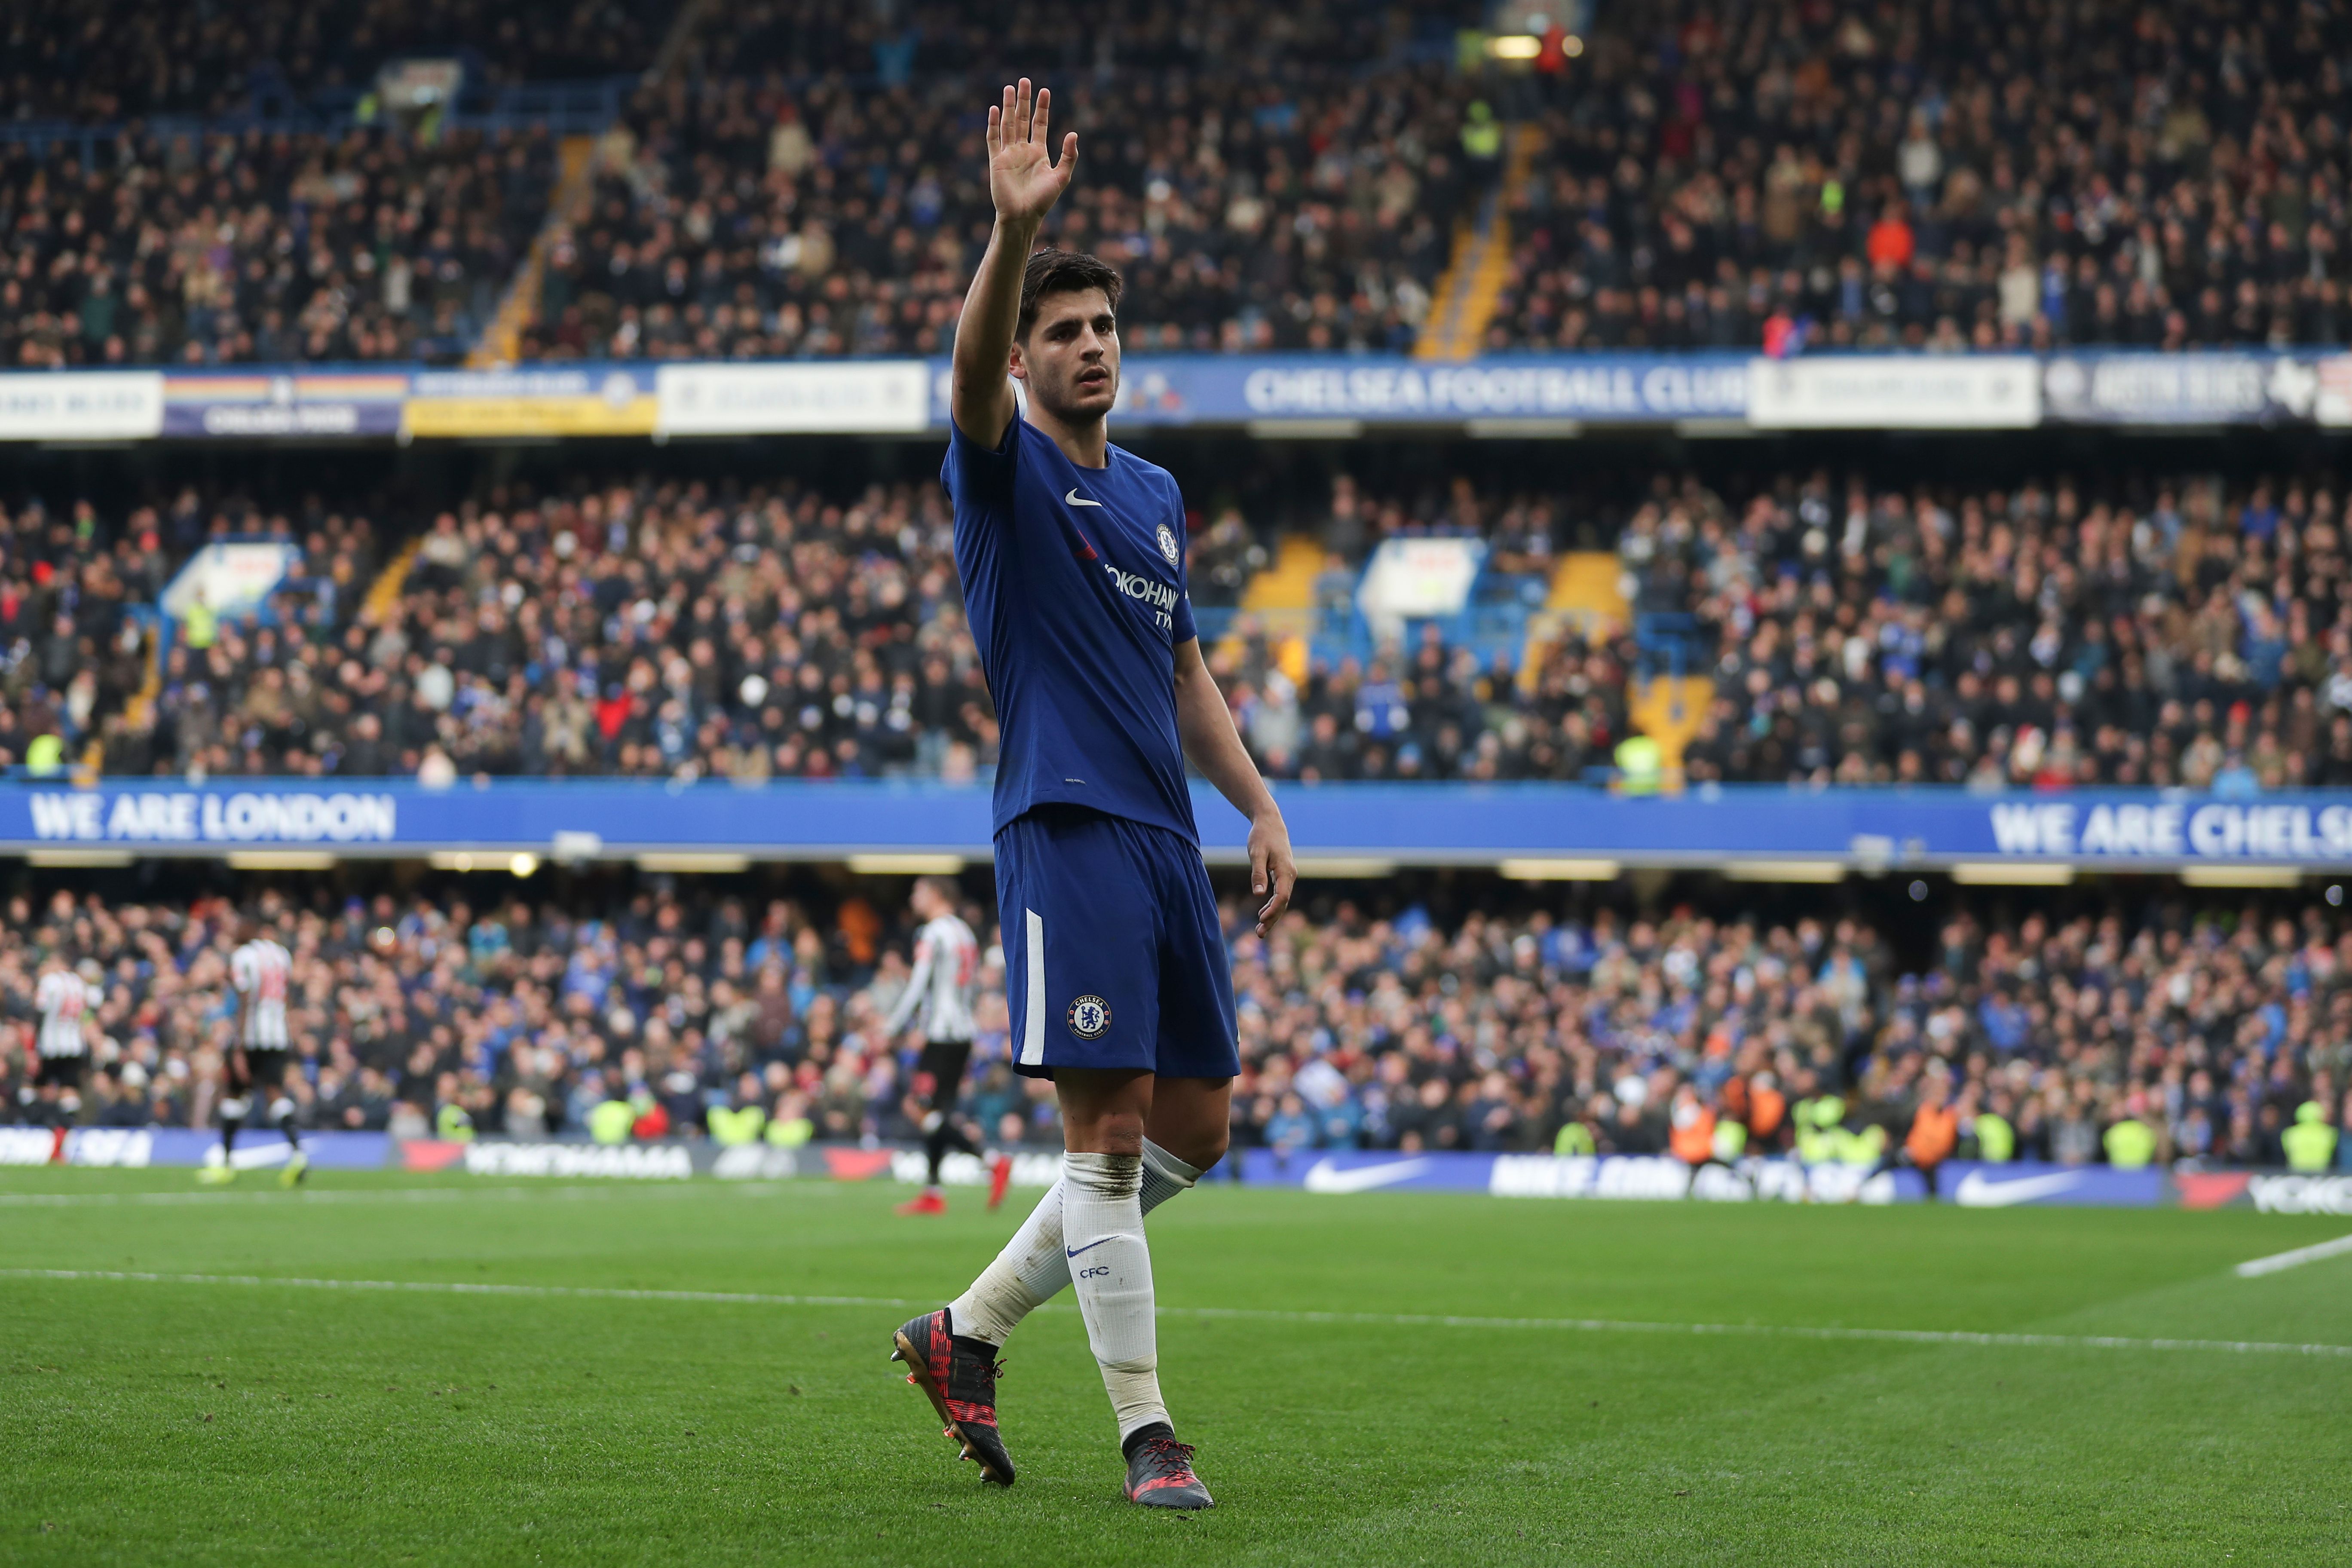 Chelsea's Spanish striker Alvaro Morata celebrates scoring his team's second goal during the English Premier League football match between Chelsea and Newcastle United at Stamford Bridge in London on December 2, 2017. / AFP PHOTO / Daniel LEAL-OLIVAS / RESTRICTED TO EDITORIAL USE. No use with unauthorized audio, video, data, fixture lists, club/league logos or 'live' services. Online in-match use limited to 75 images, no video emulation. No use in betting, games or single club/league/player publications.  /         (Photo credit should read DANIEL LEAL-OLIVAS/AFP/Getty Images)